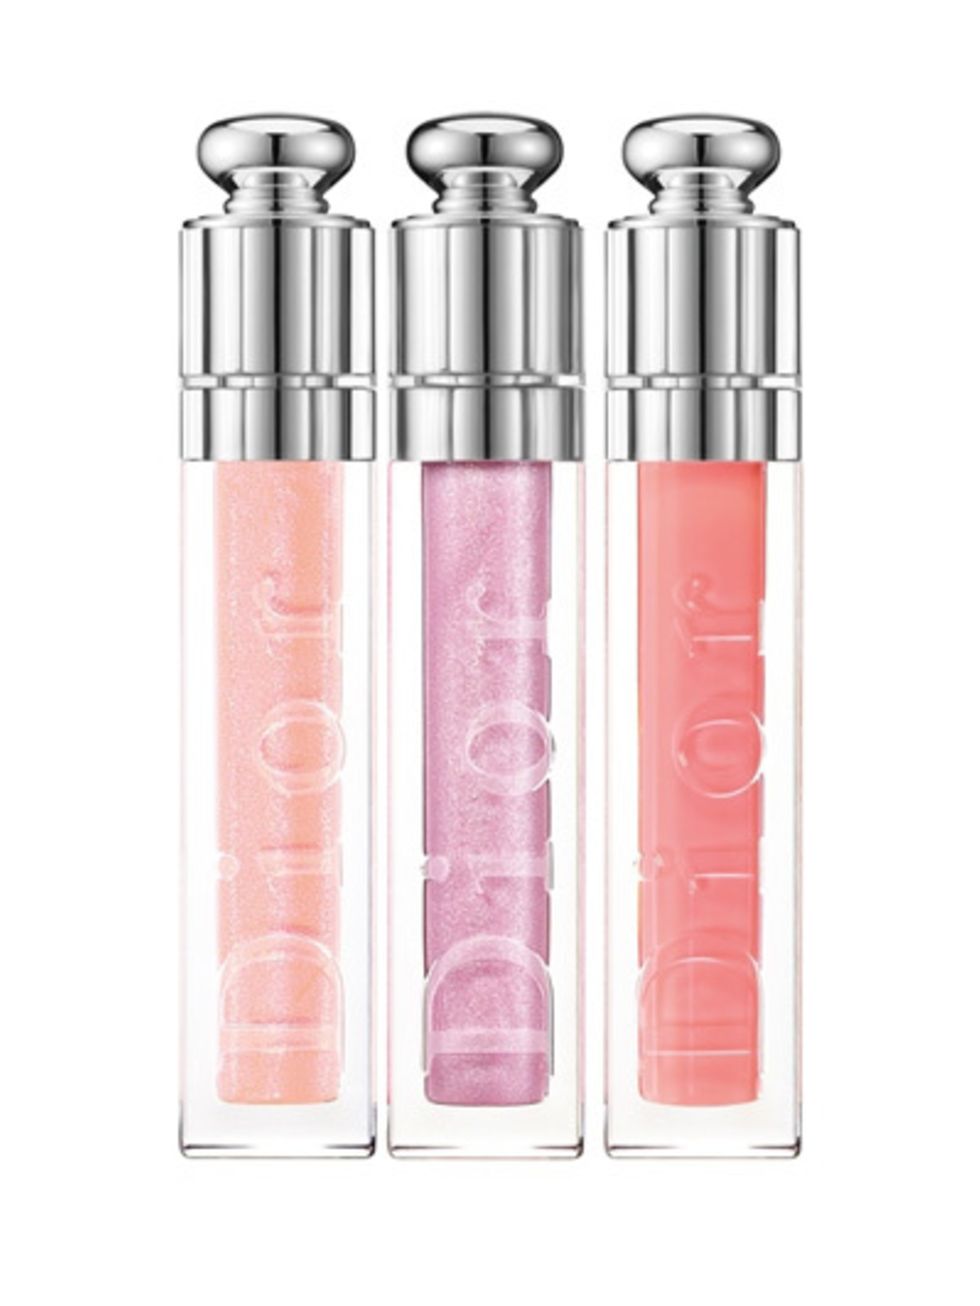 Product, Pink, Peach, Magenta, Cylinder, Silver, Cosmetics, 